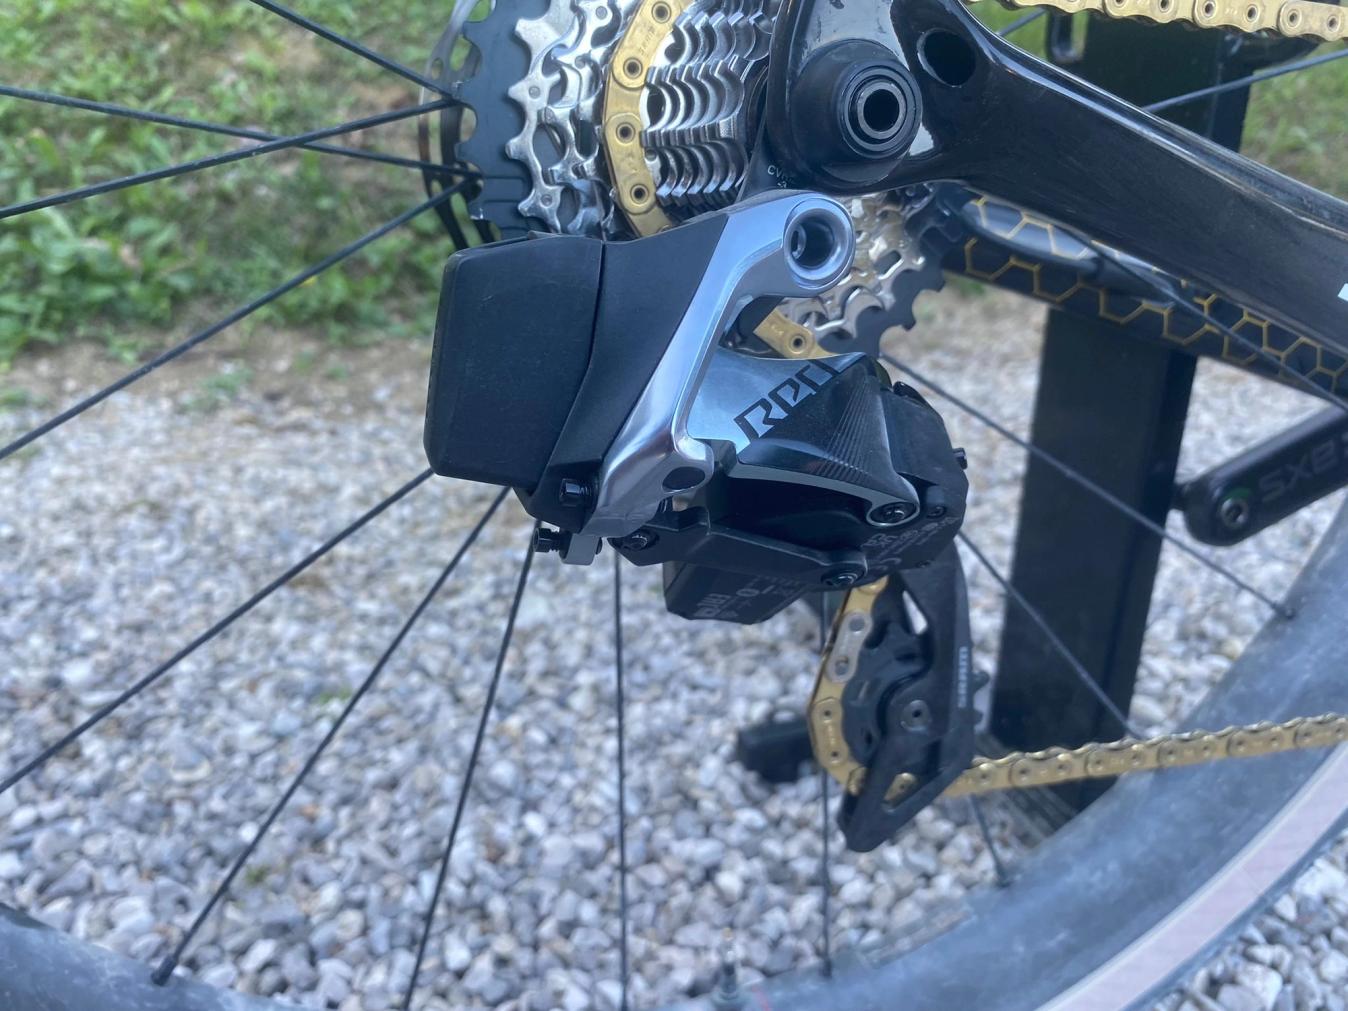 The SRAM Red mech keeping the gears moving 